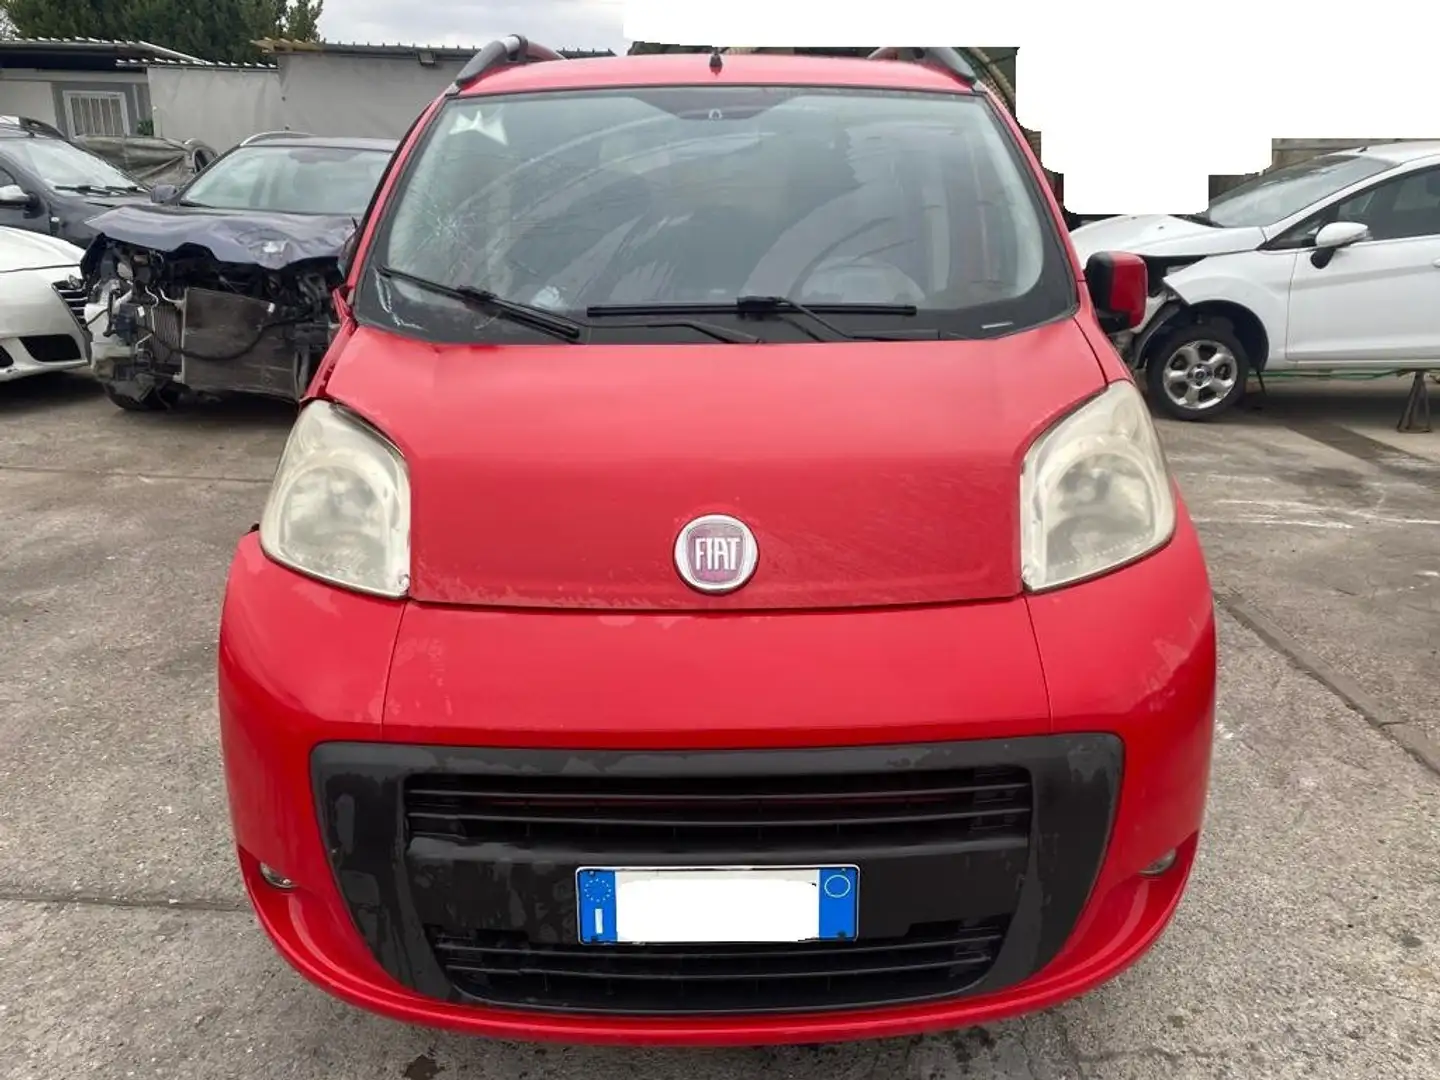 Fiat Qubo 1.4 natural power Rosso - 2